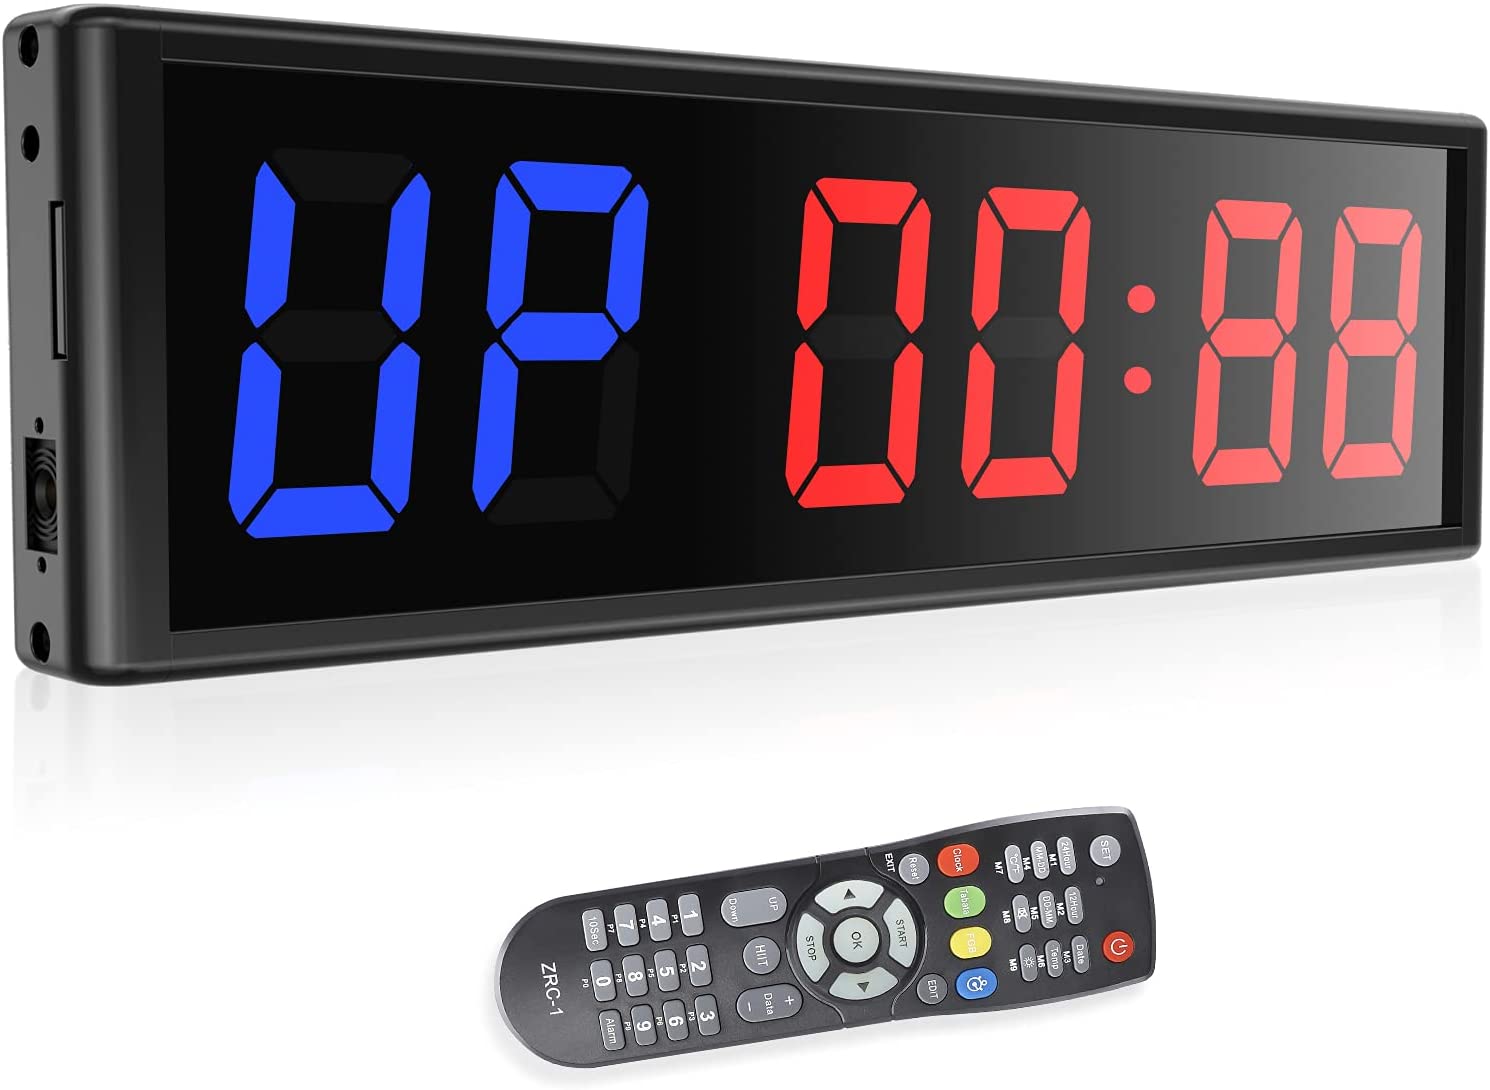 Bssay Gym Timer LED Workout Colck Count Down/Up Clock,11.5 x 3.5 Ultra-Clear Digital Display led Interval Timer with Remote Work with Power Bank for Outdoor Workout and Home Gym Garage Fitness